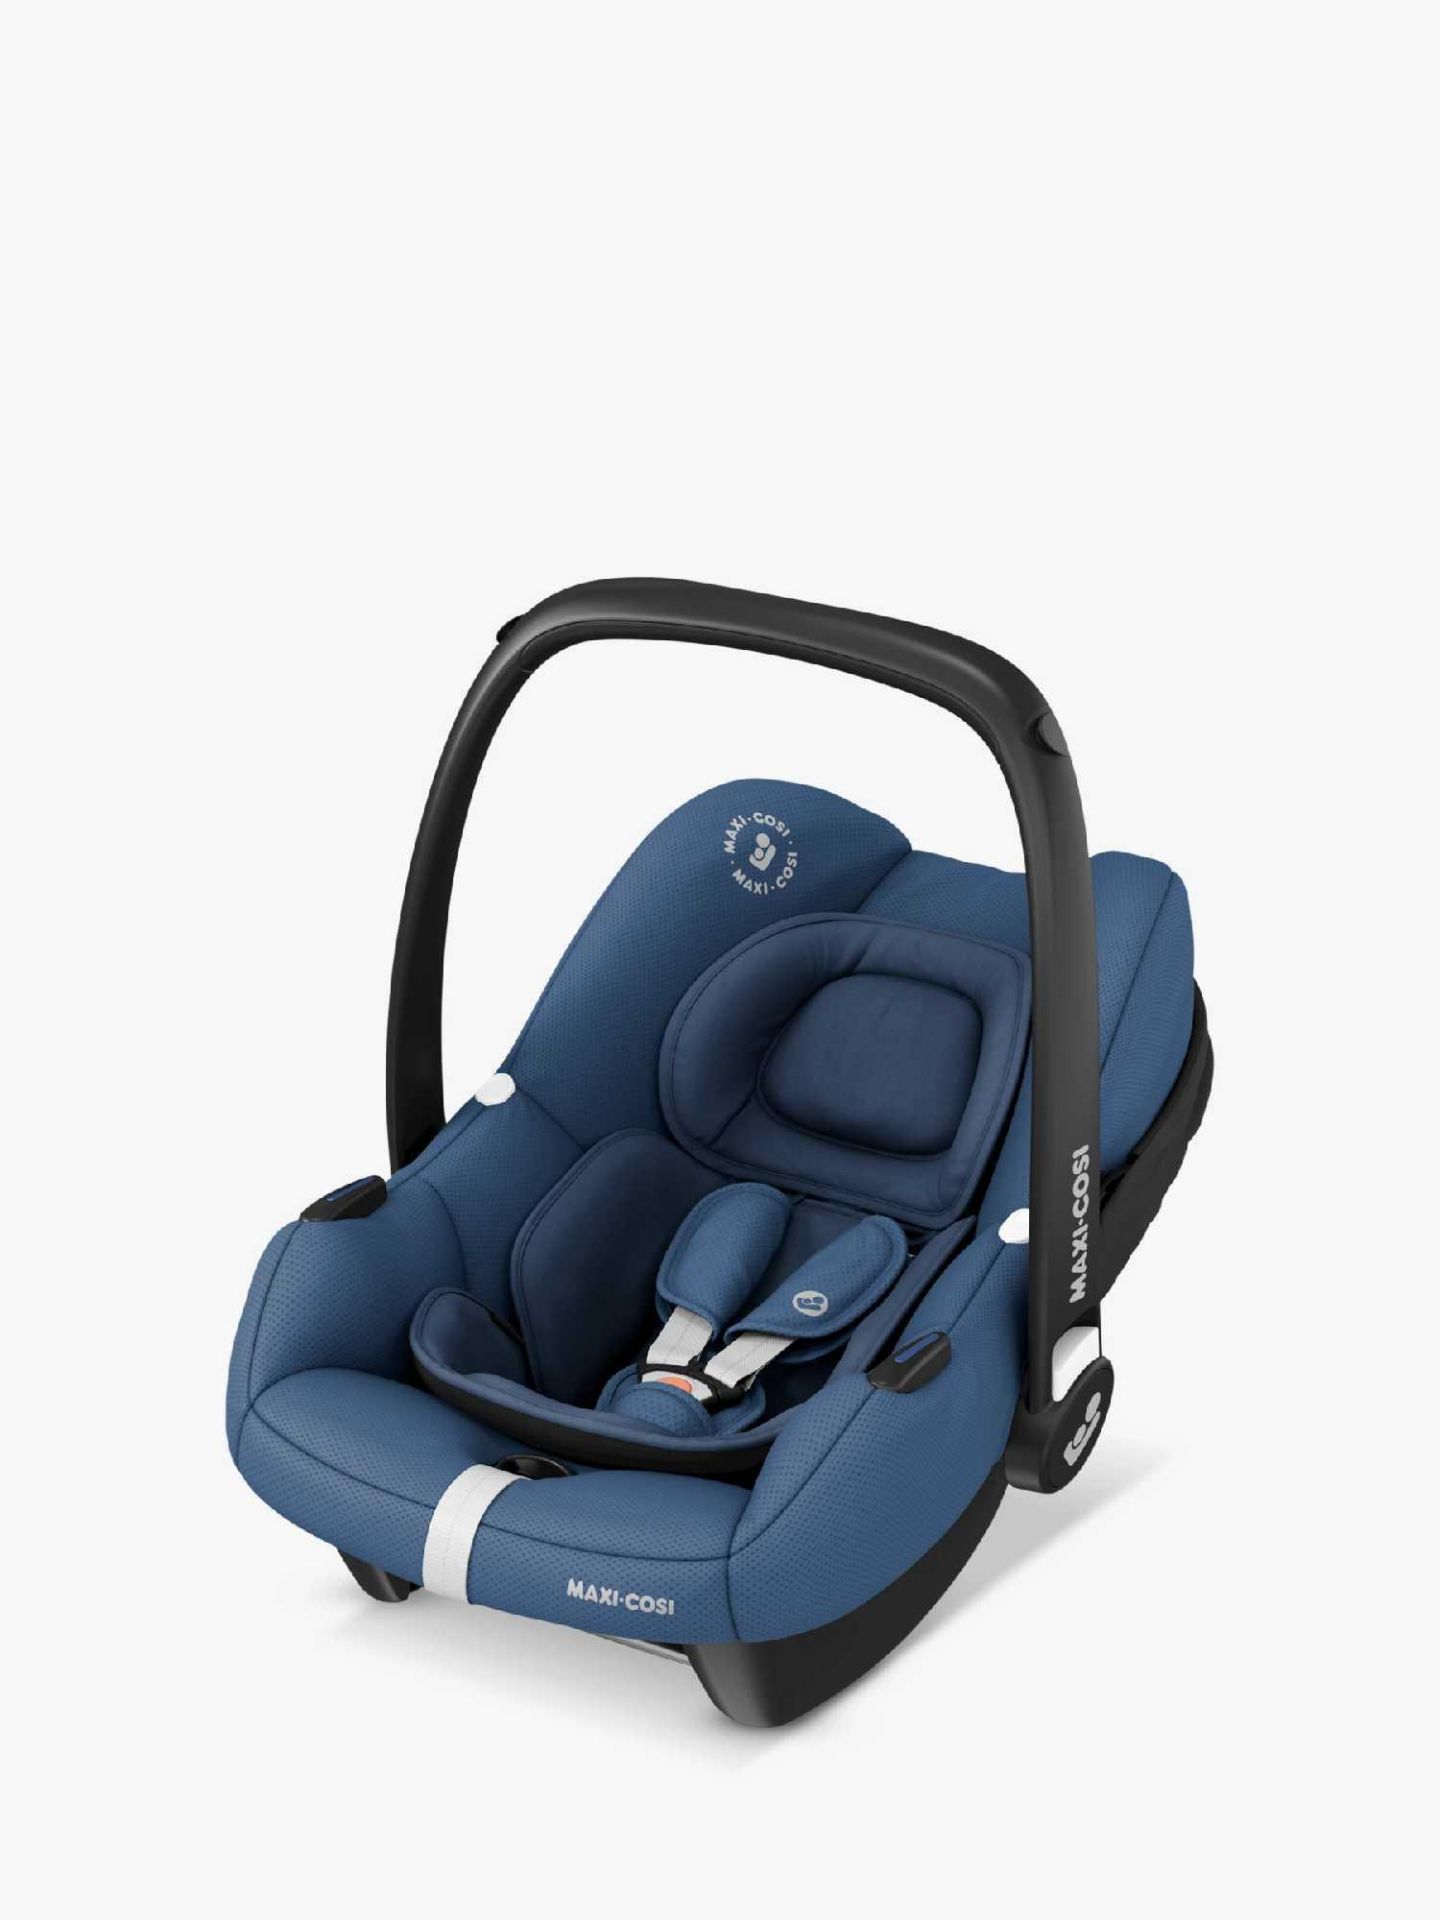 Rrp £170 Maxi Cosi Rock I Size Children'S Car Seat - Image 2 of 2